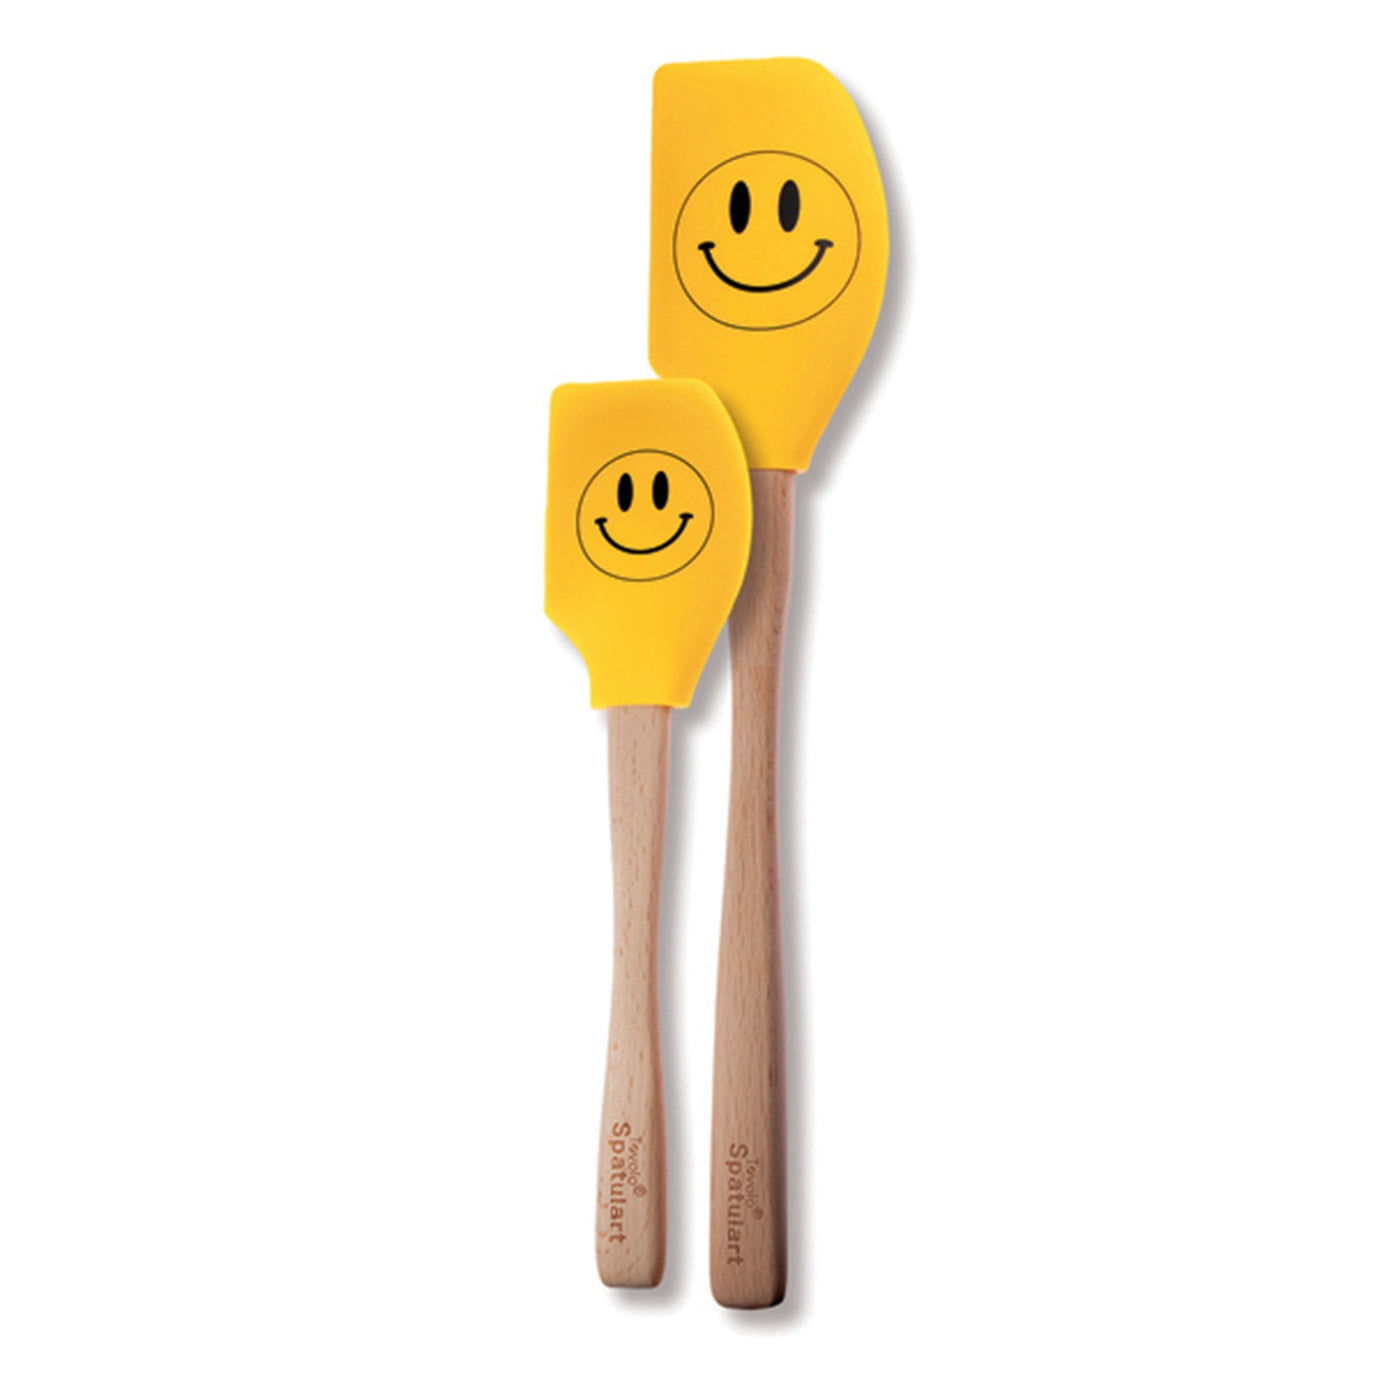 NEW Smiley Face Shaped Bowl Scraper Silicone Spatula Cooking Baking Tool Yellow 